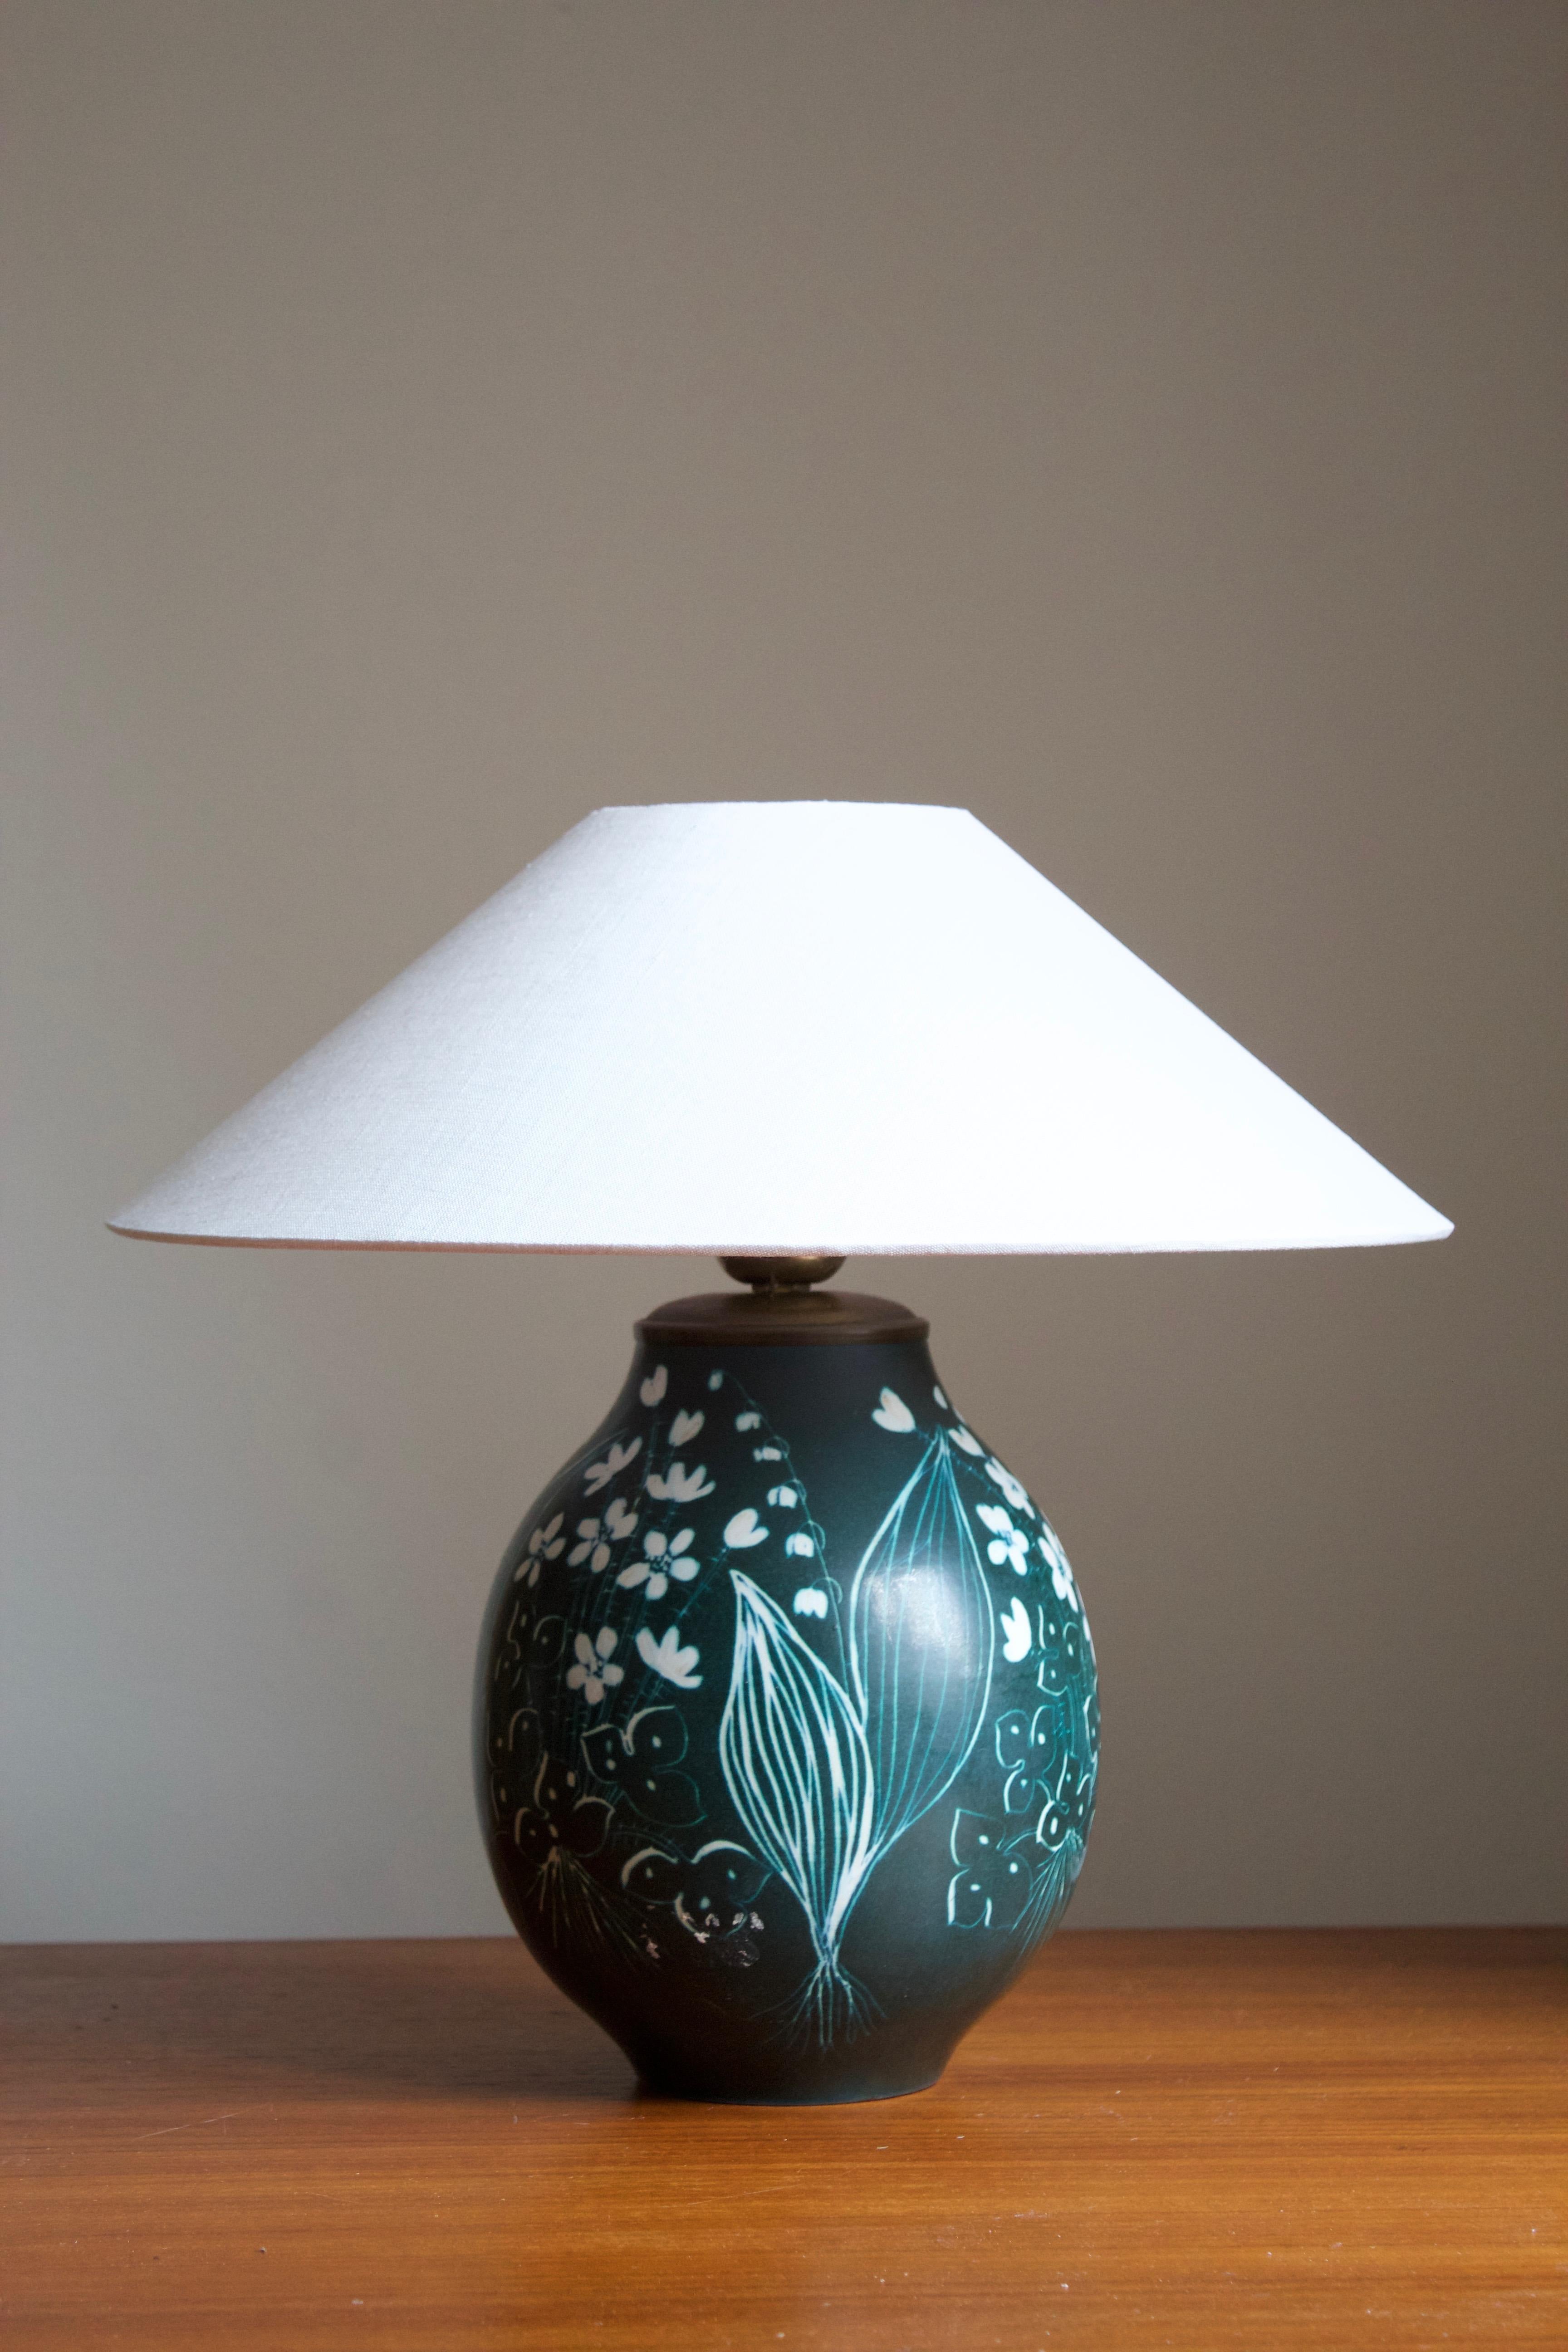 A table lamp produced by Rörstrand, Sweden, 1950. Designed by Hertha Bengtsson, (Swedish, 1914-1997). Signed.

Stated dimensions excluding lampshade. Height includes socket. Sold without lampshade.

Other ceramicists of the period include Axel